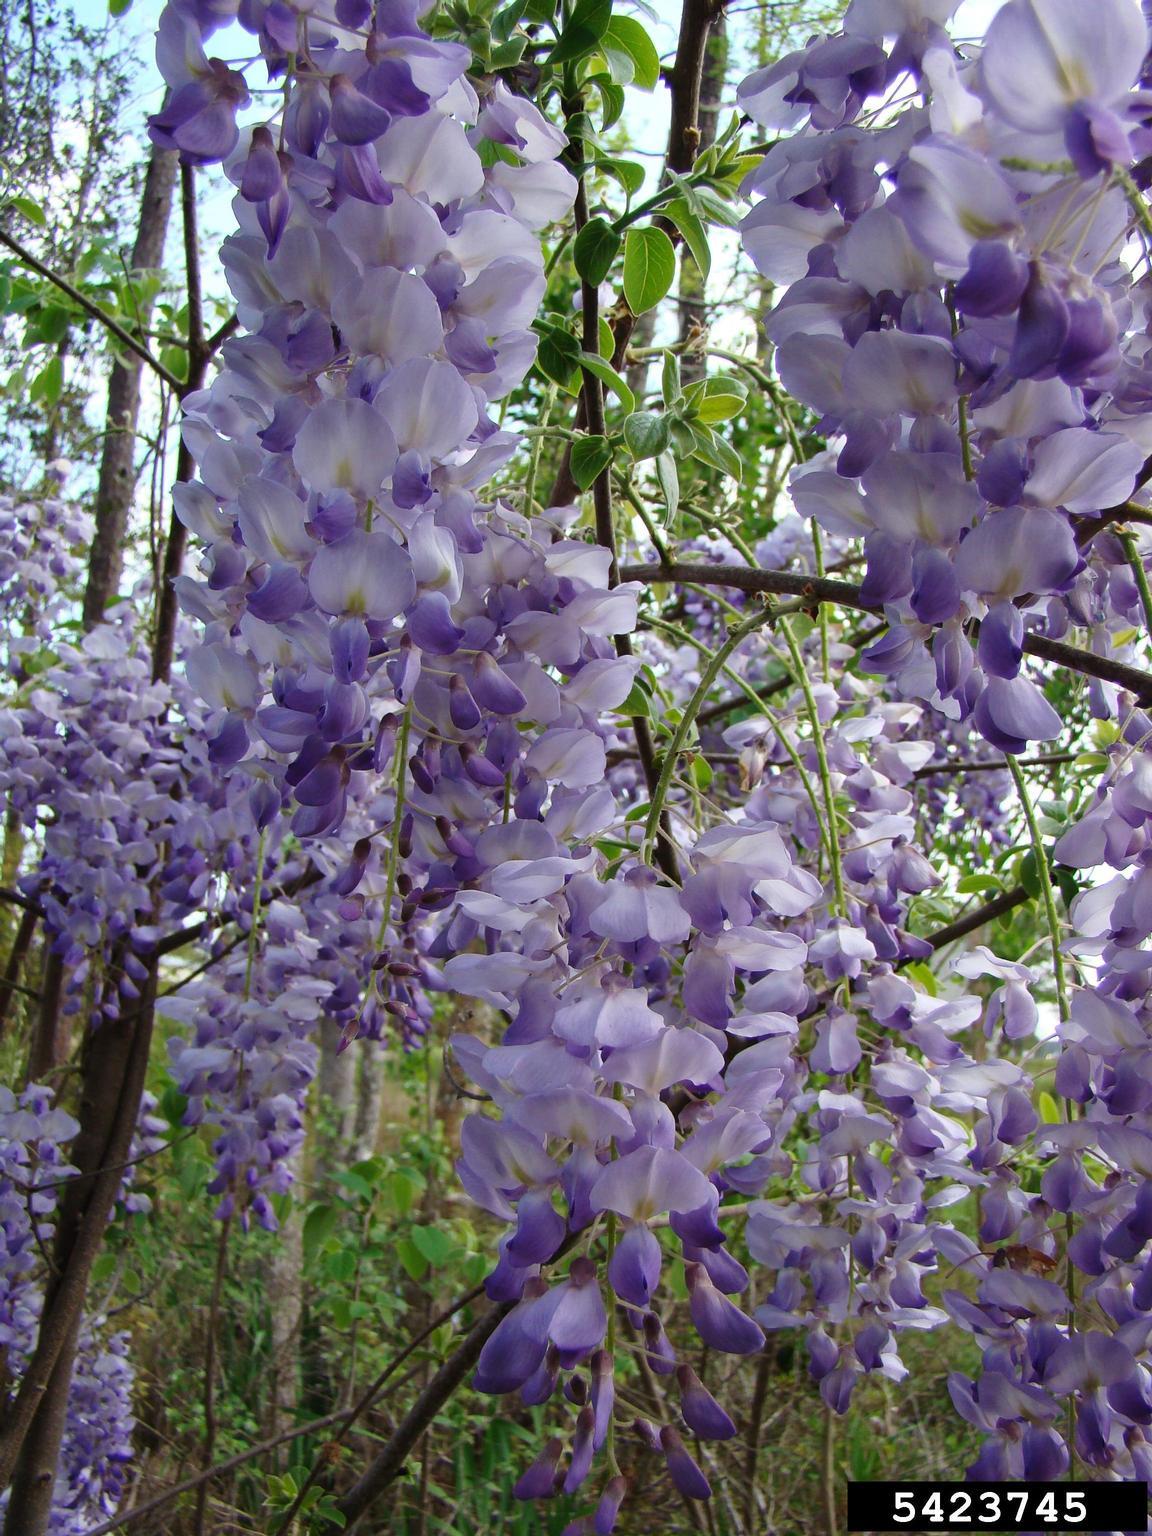 Chinese Wisteria. Photo by Rebekah D. Wallace, University of Georgia, Bugwood.org